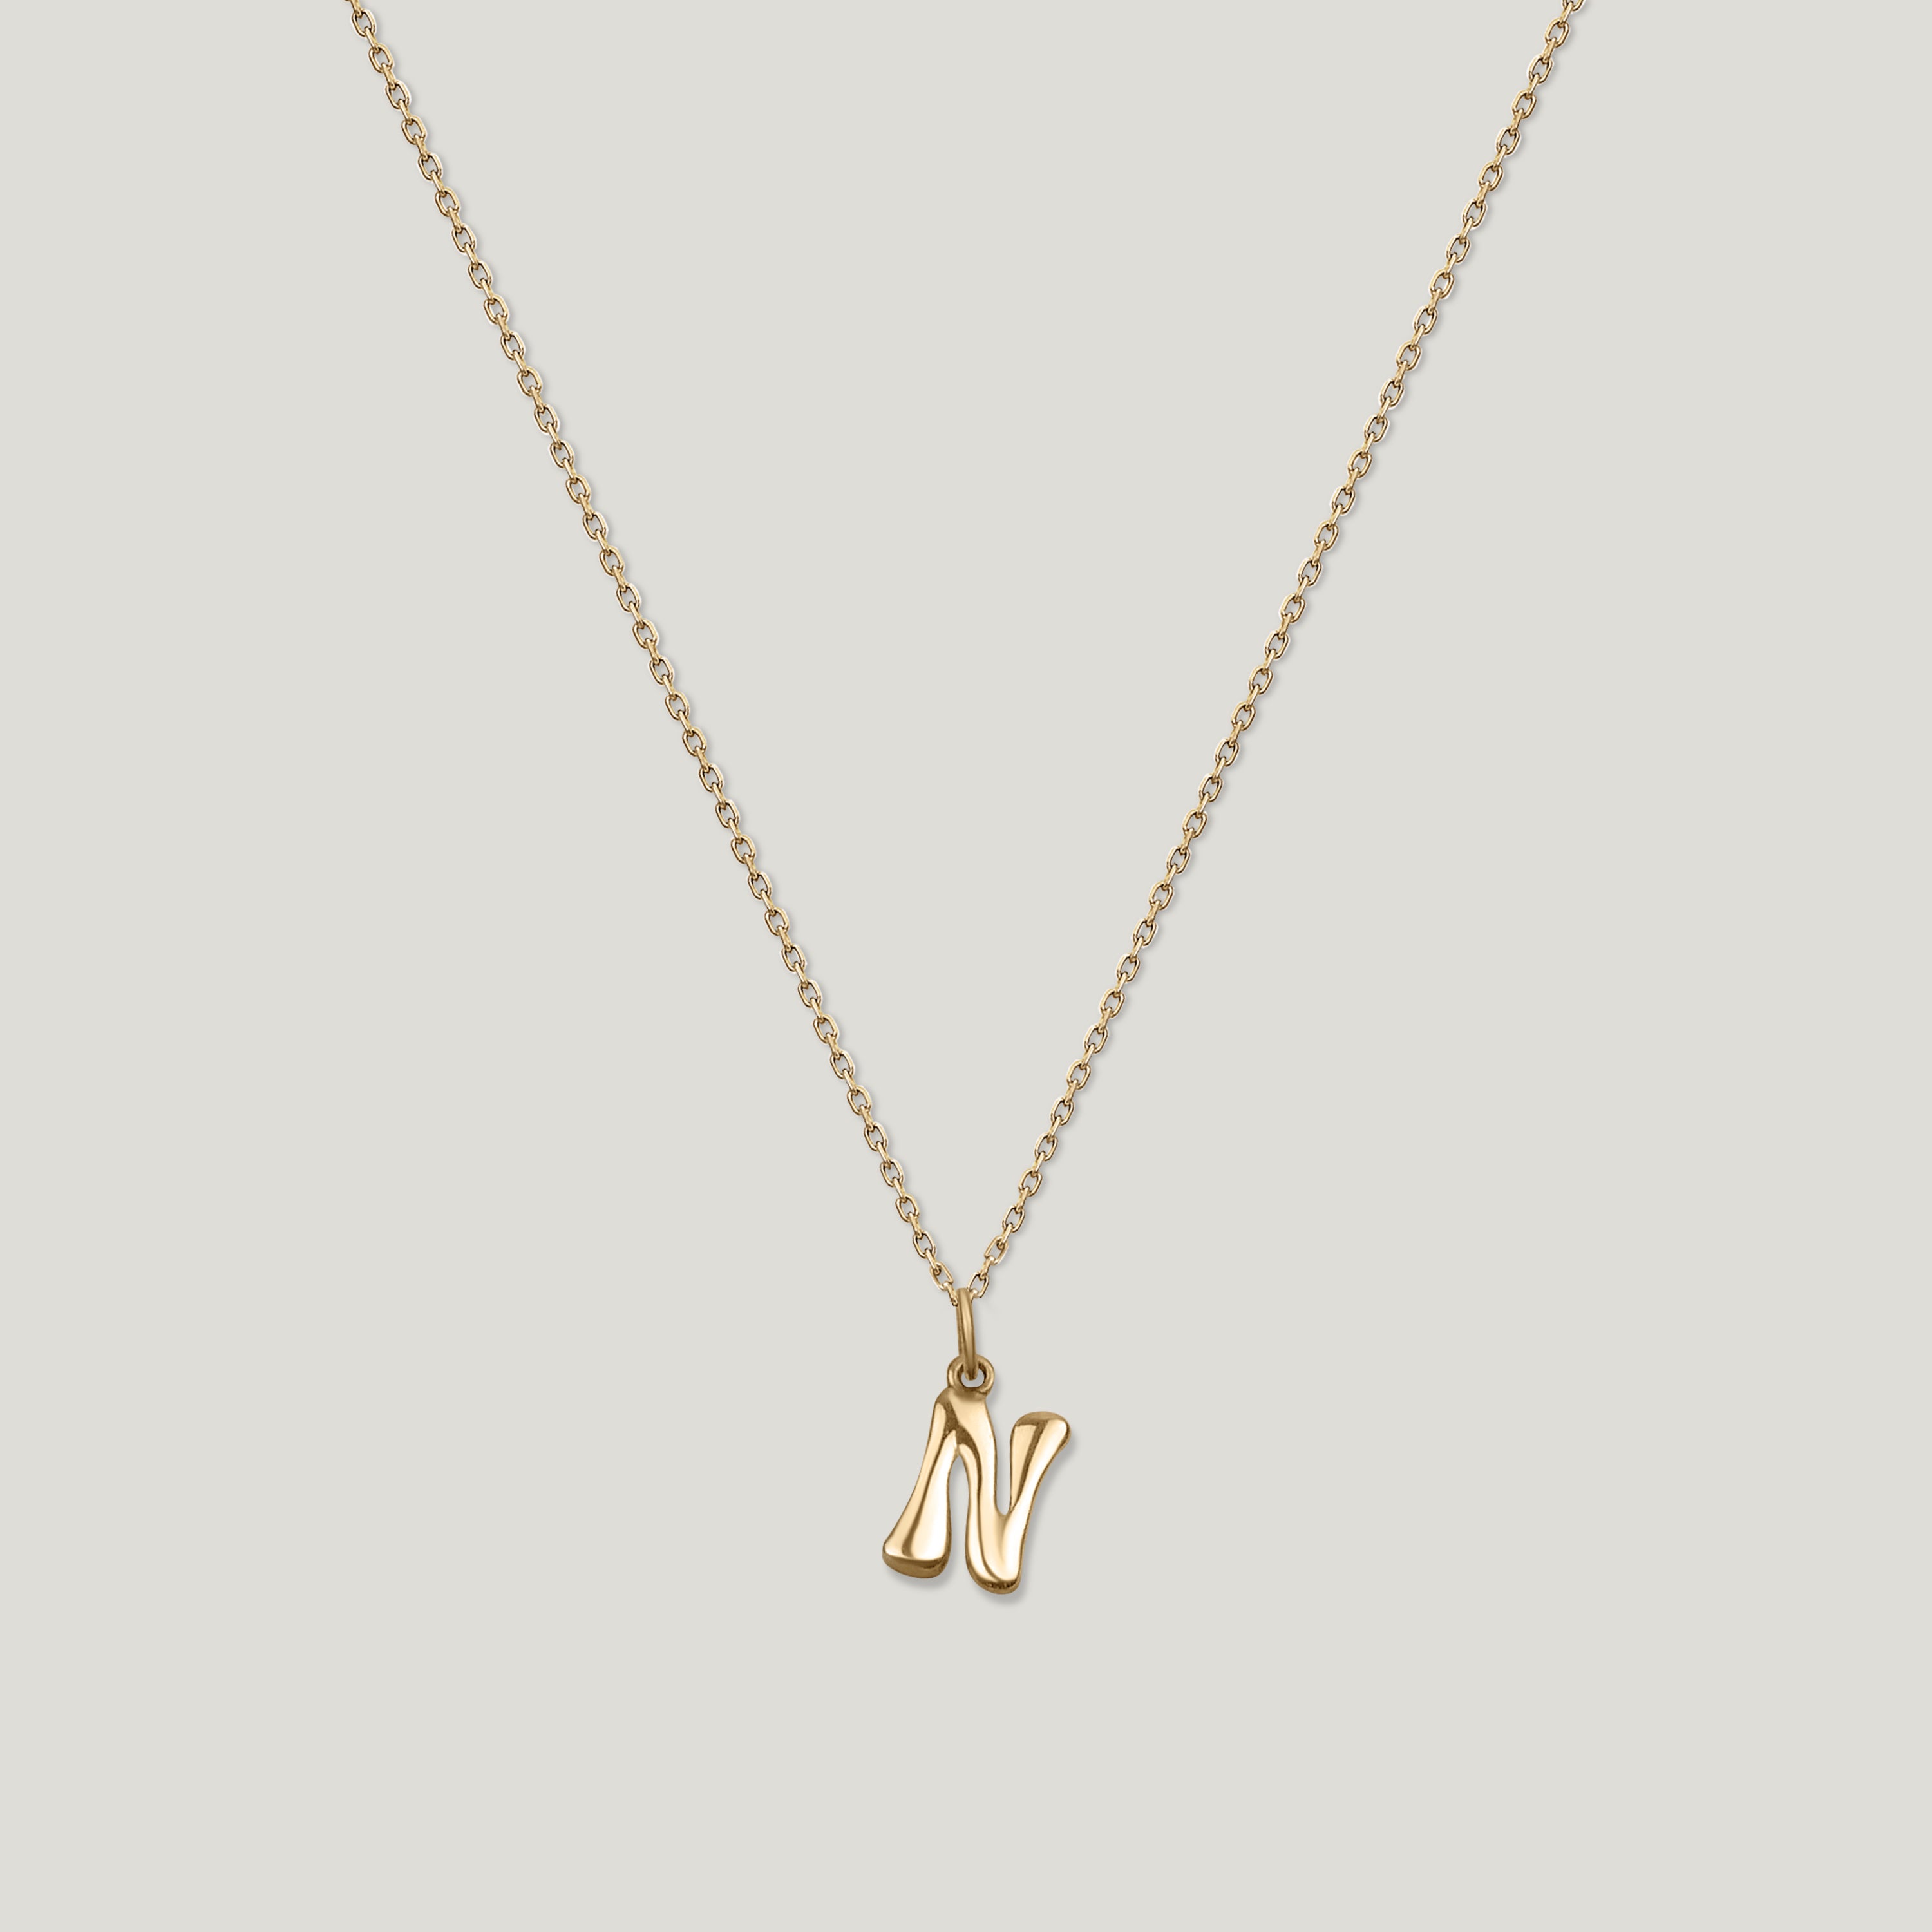 Fairmined Gold Strand Cable Chain and Letter Charm N